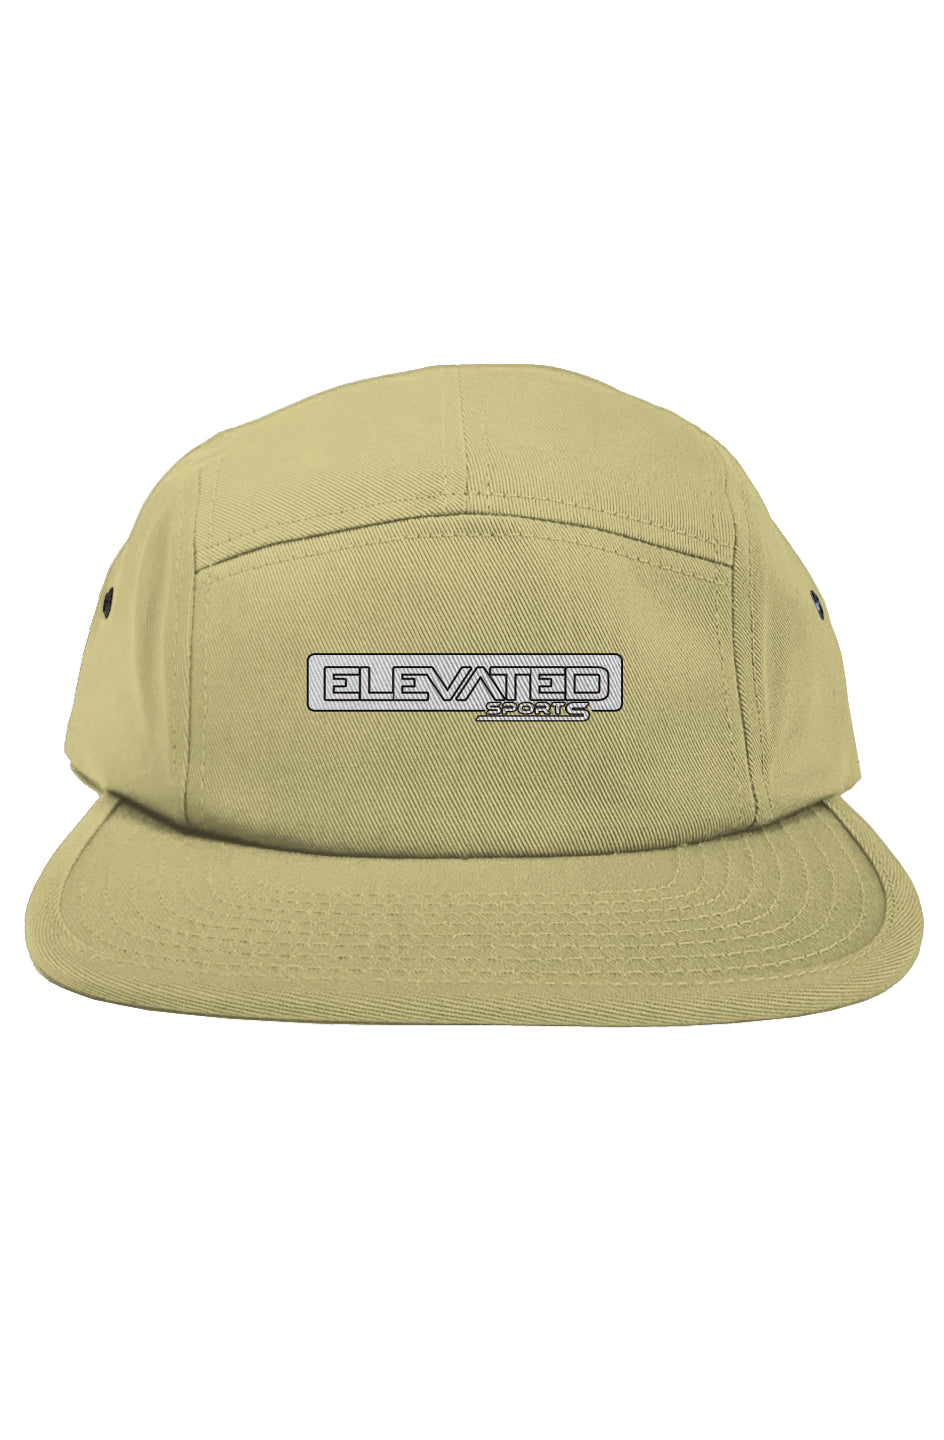 Embroidered Elevated original 5 panel